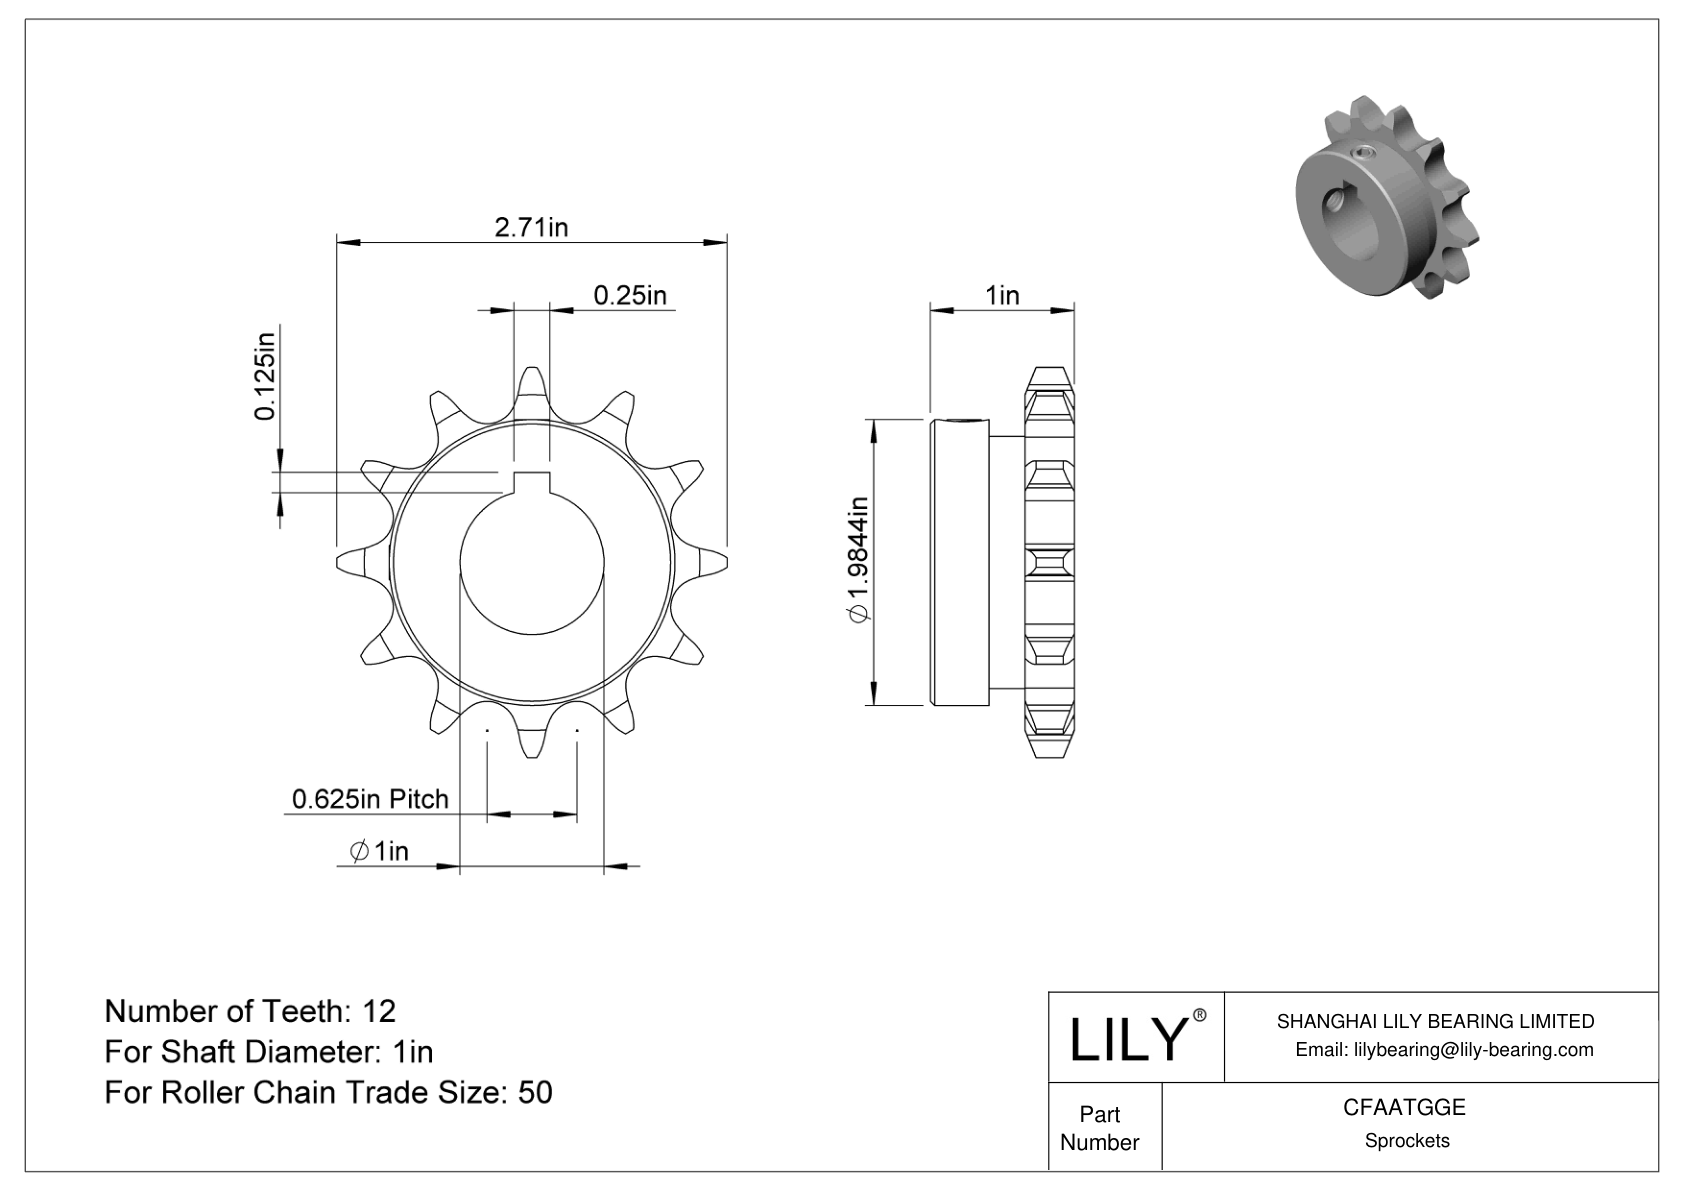 CFAATGGE Wear-Resistant Sprockets for ANSI Roller Chain cad drawing